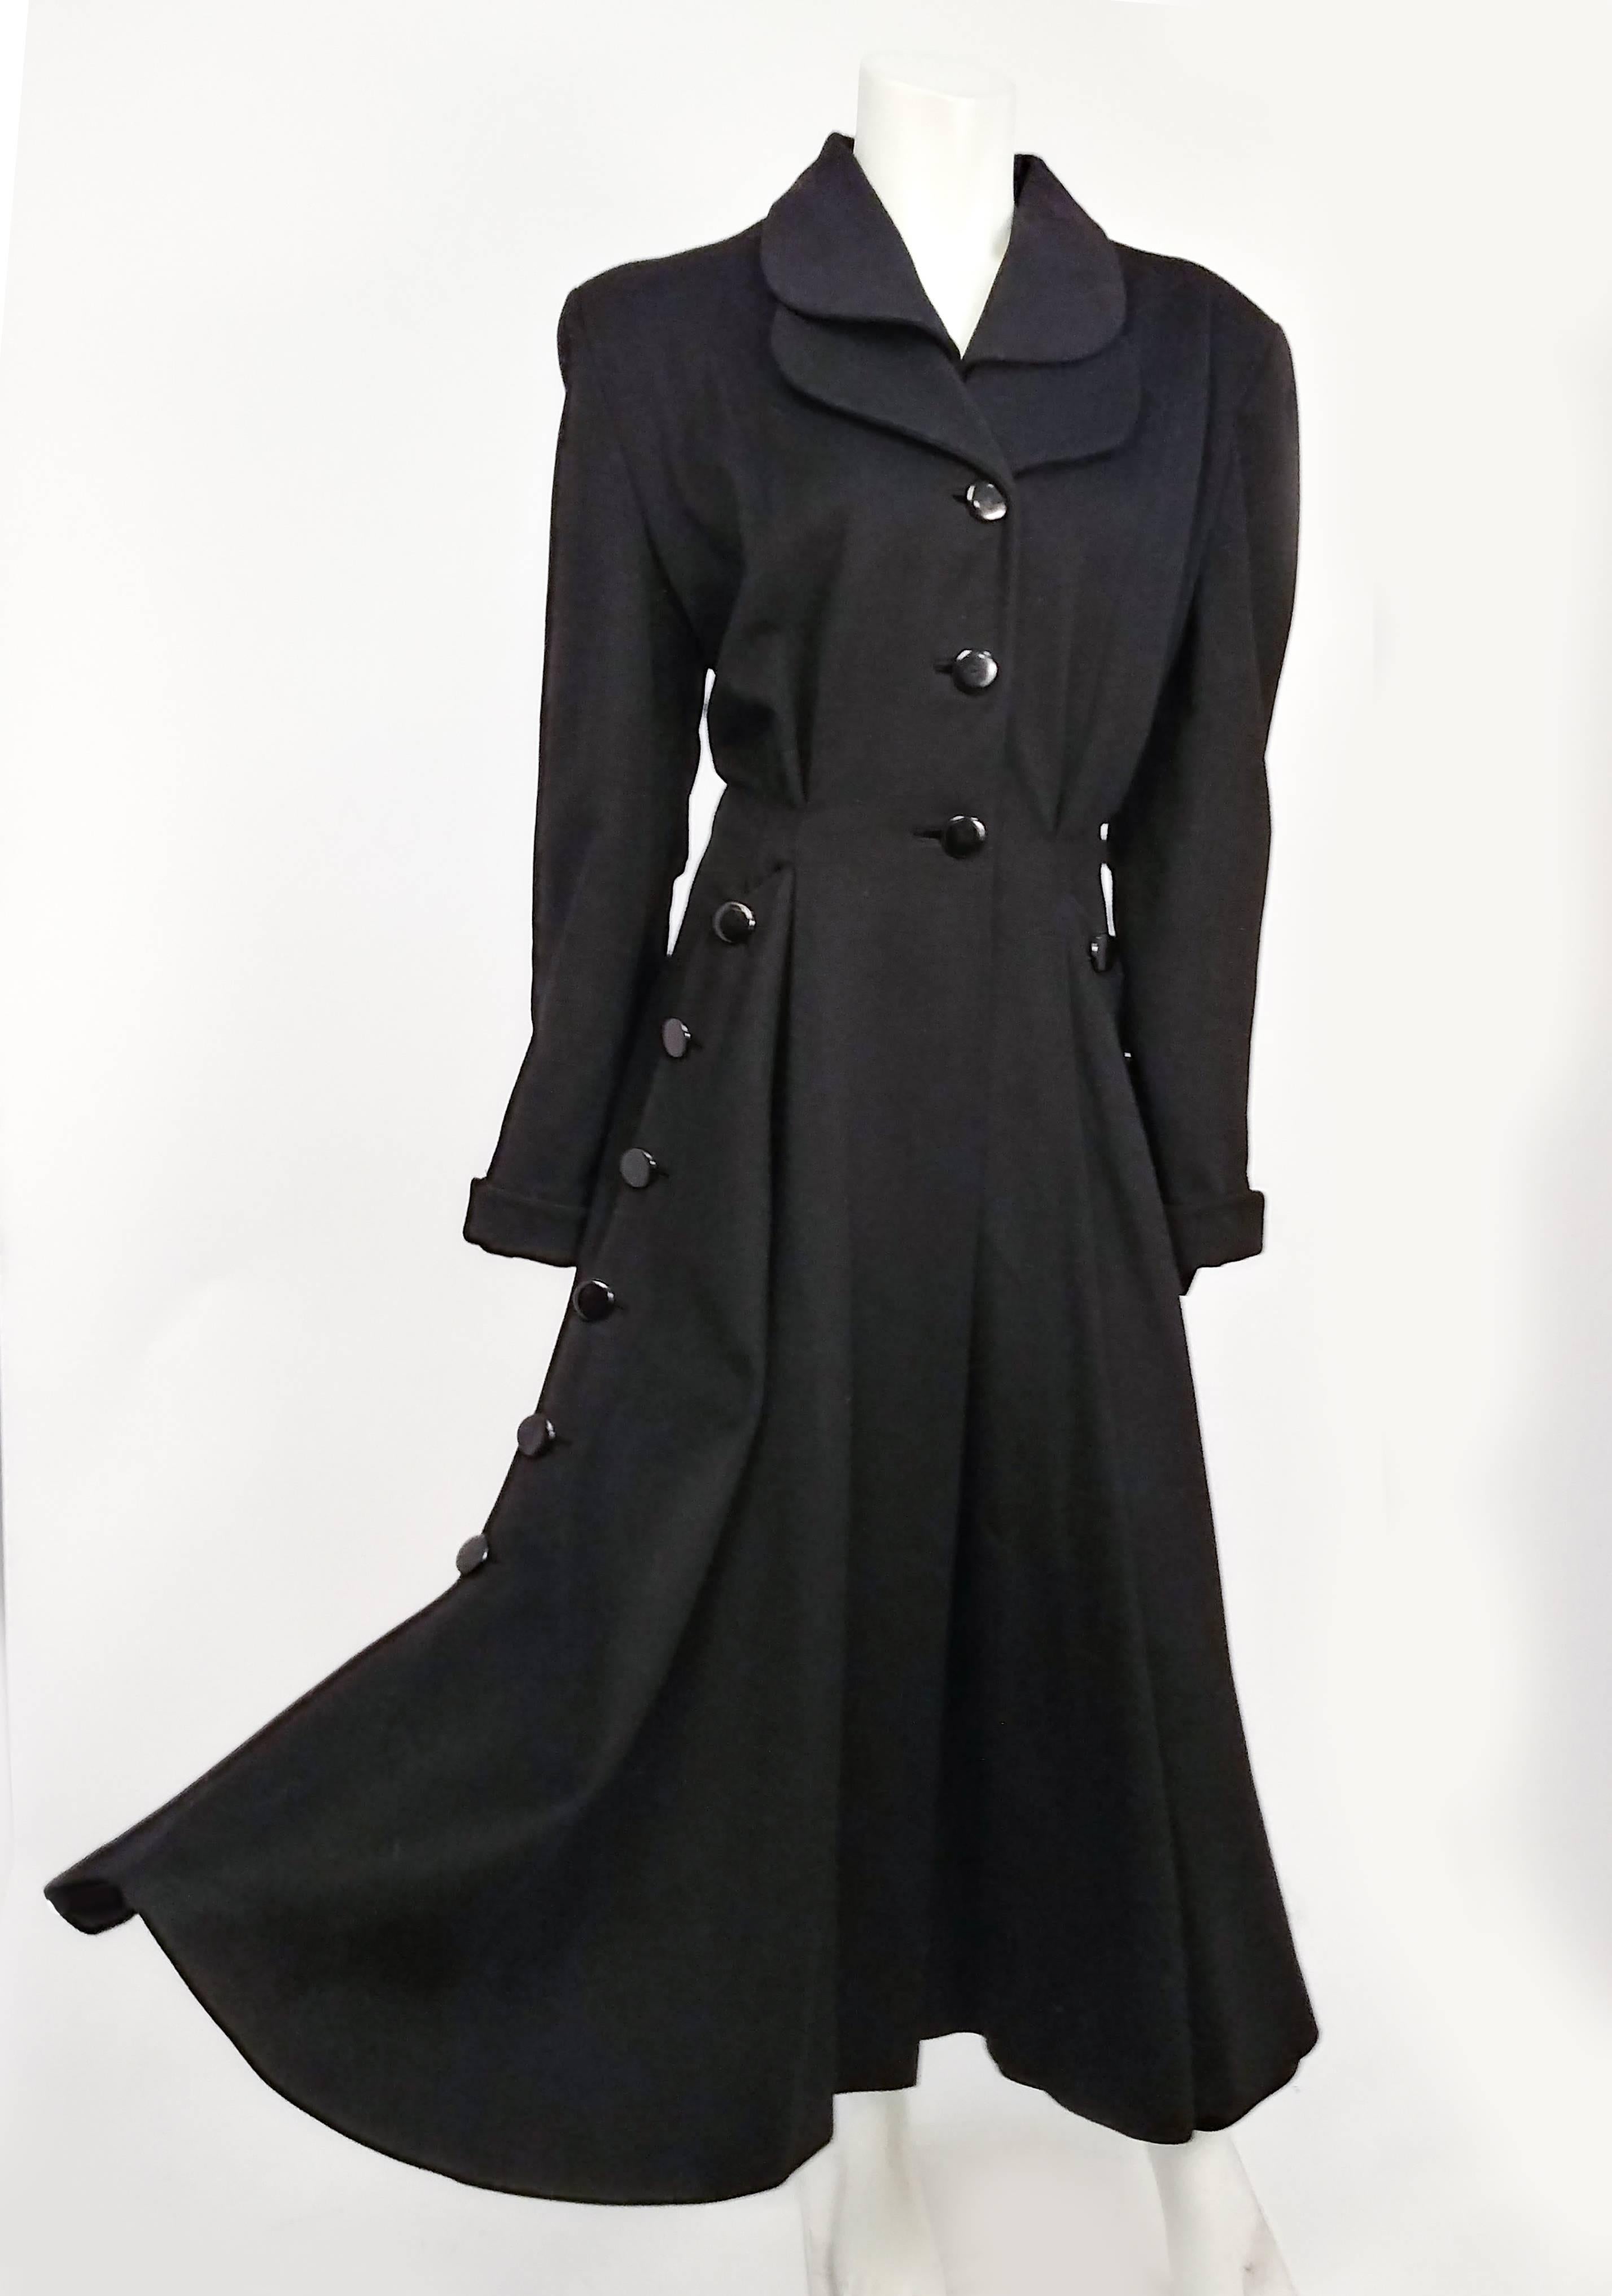 1940s Black Long Wool Noir Coat. Perfect flim noir style coat alludes to a sense of mystery. Interest layered double lapel detail and buttons down the sides, flared skirt perfect for swishing against your stockings as you walk down a dark